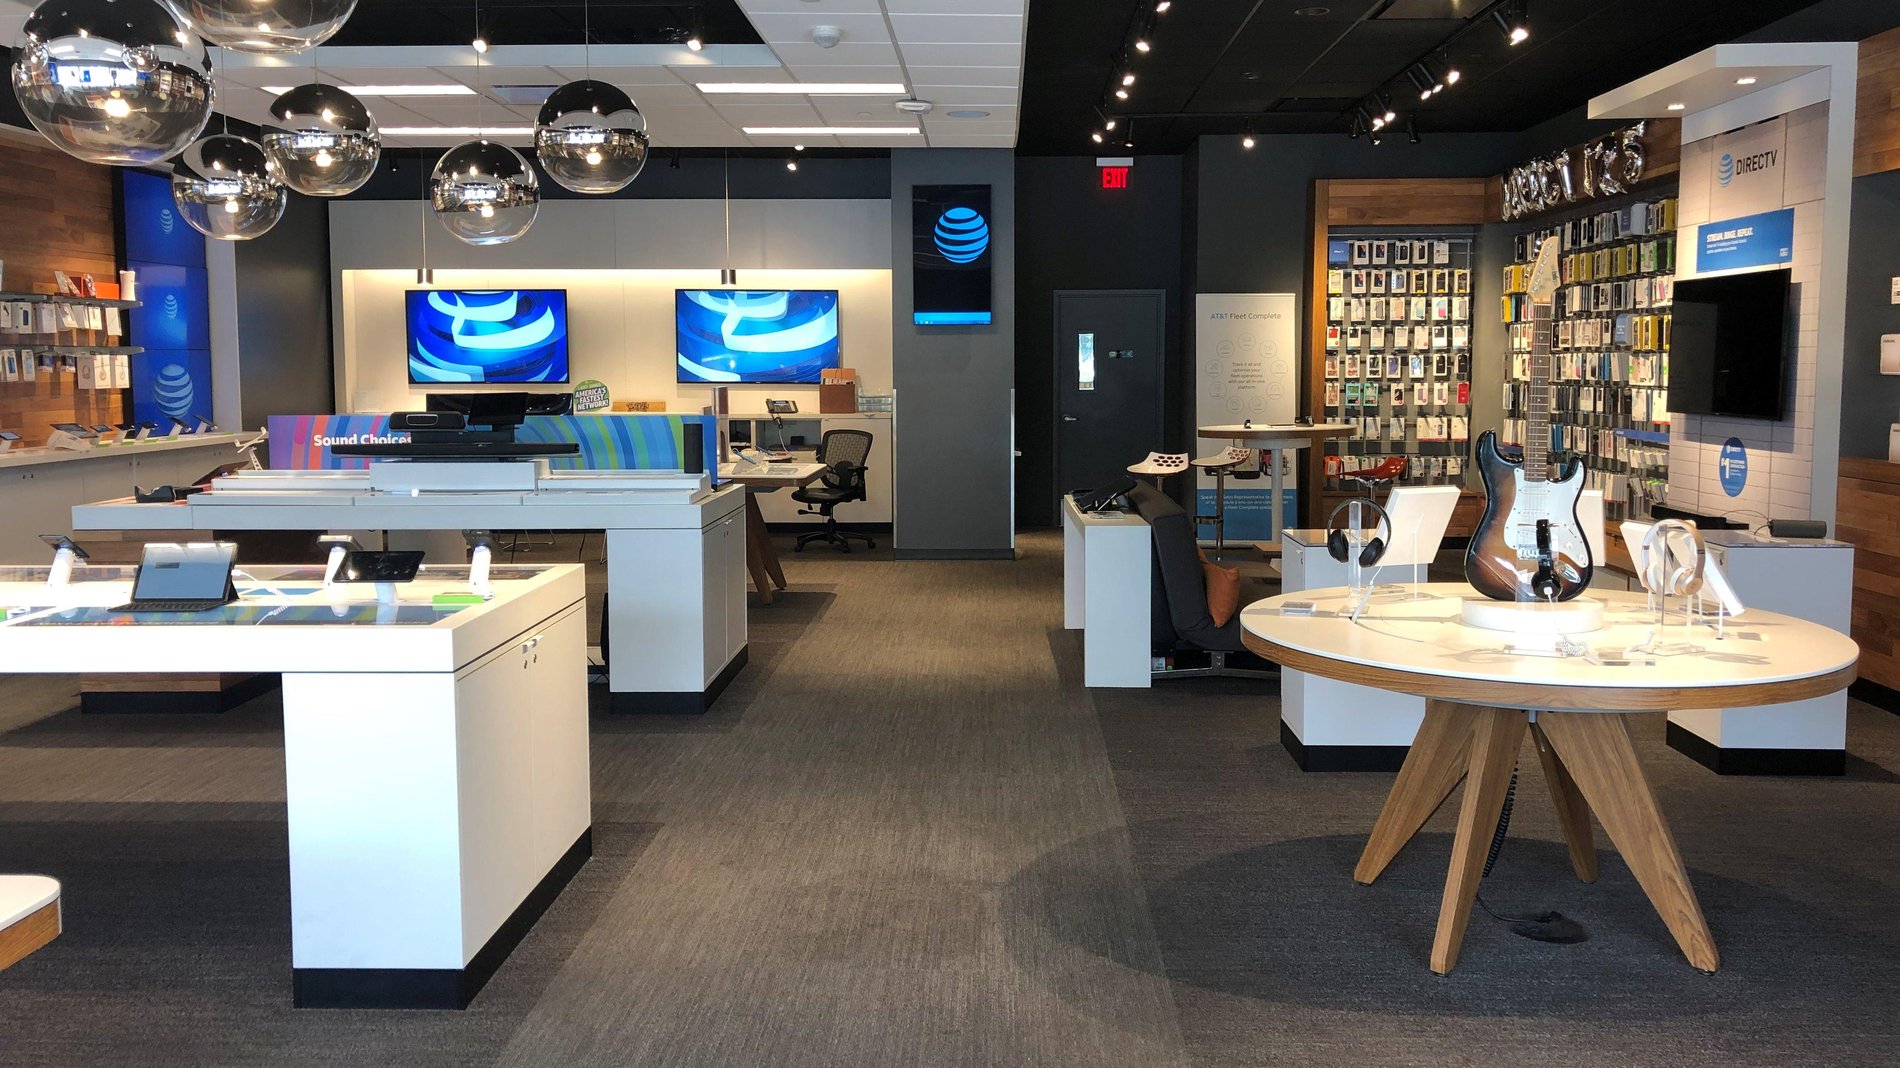 AT&T Store Palatka Palatka, FL Mobile Phones, Prepaid Plans and